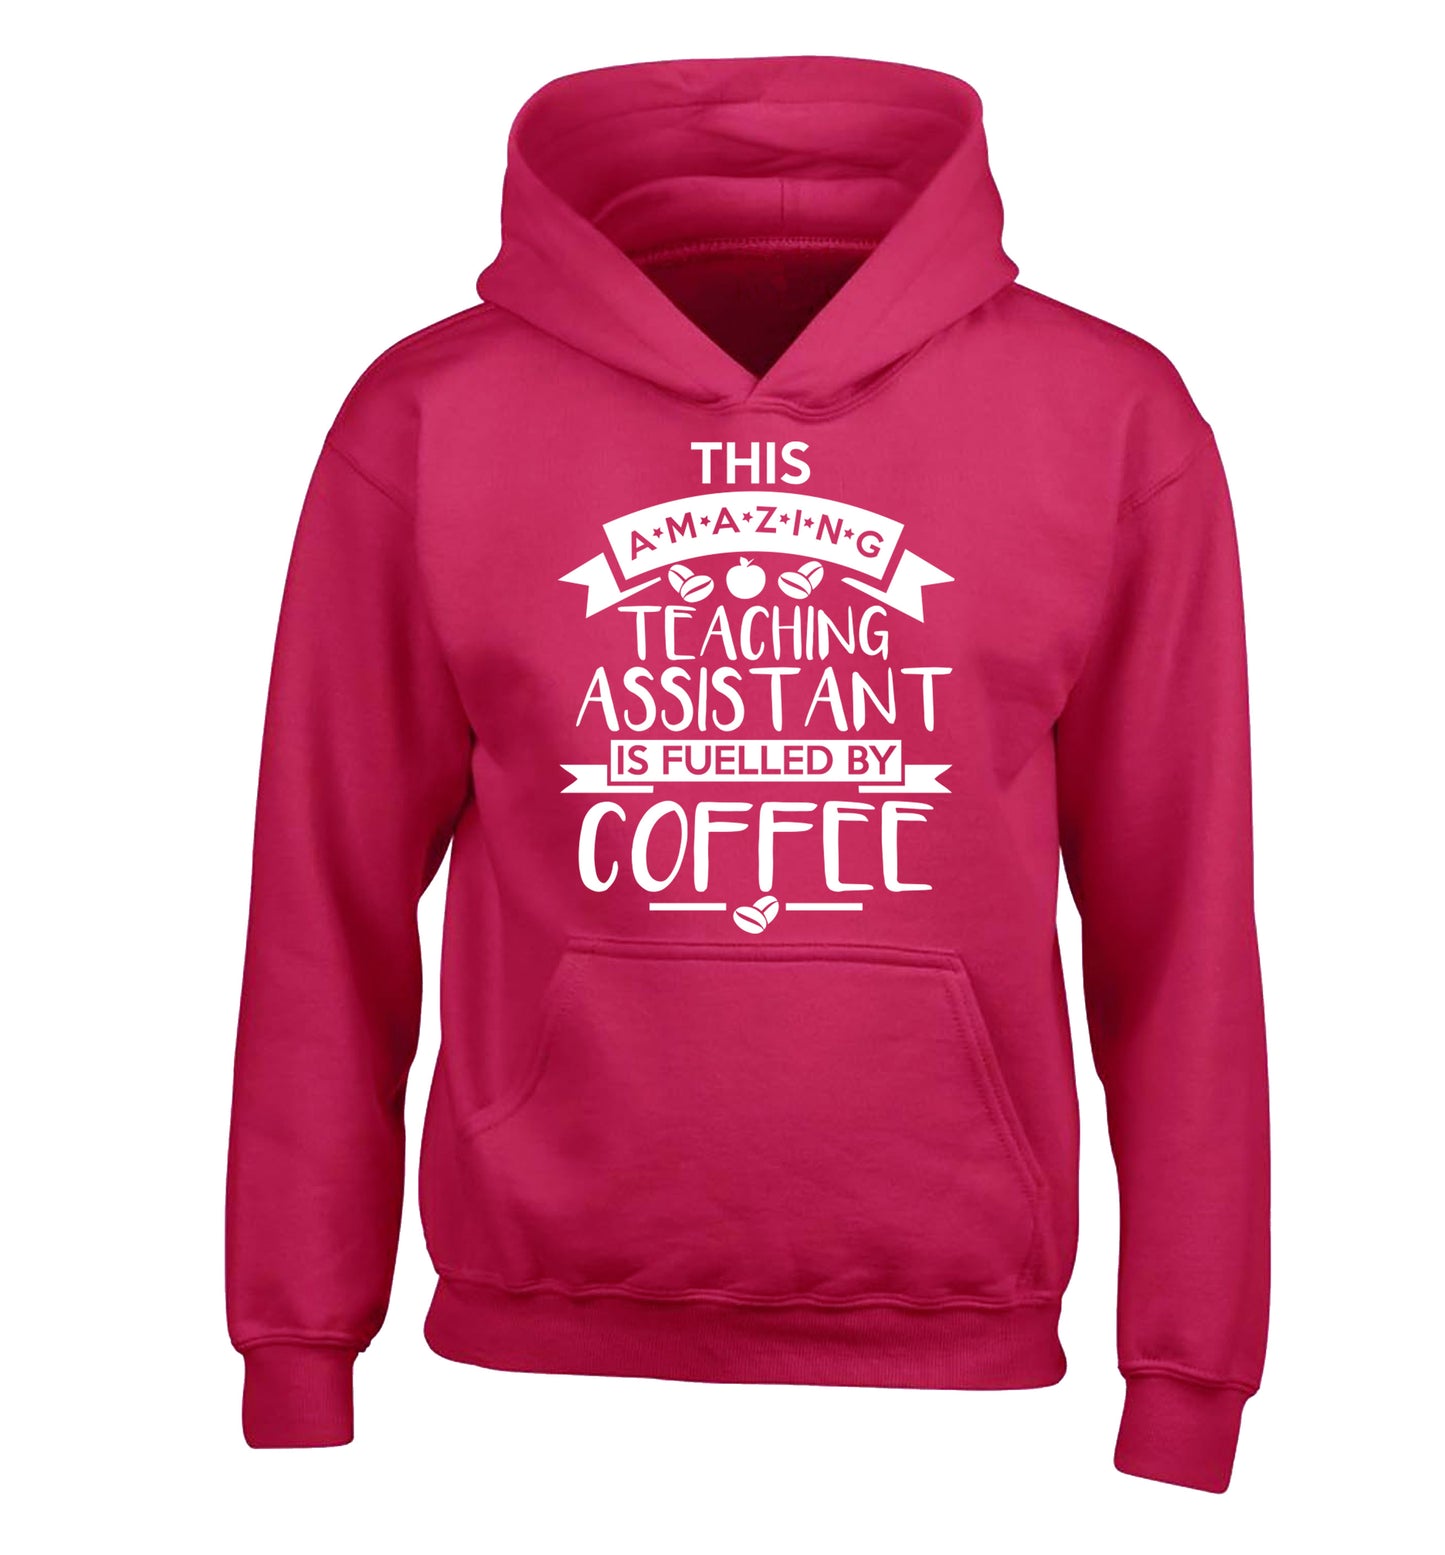 This amazing teaching assistant is fuelled by coffee children's pink hoodie 12-13 Years